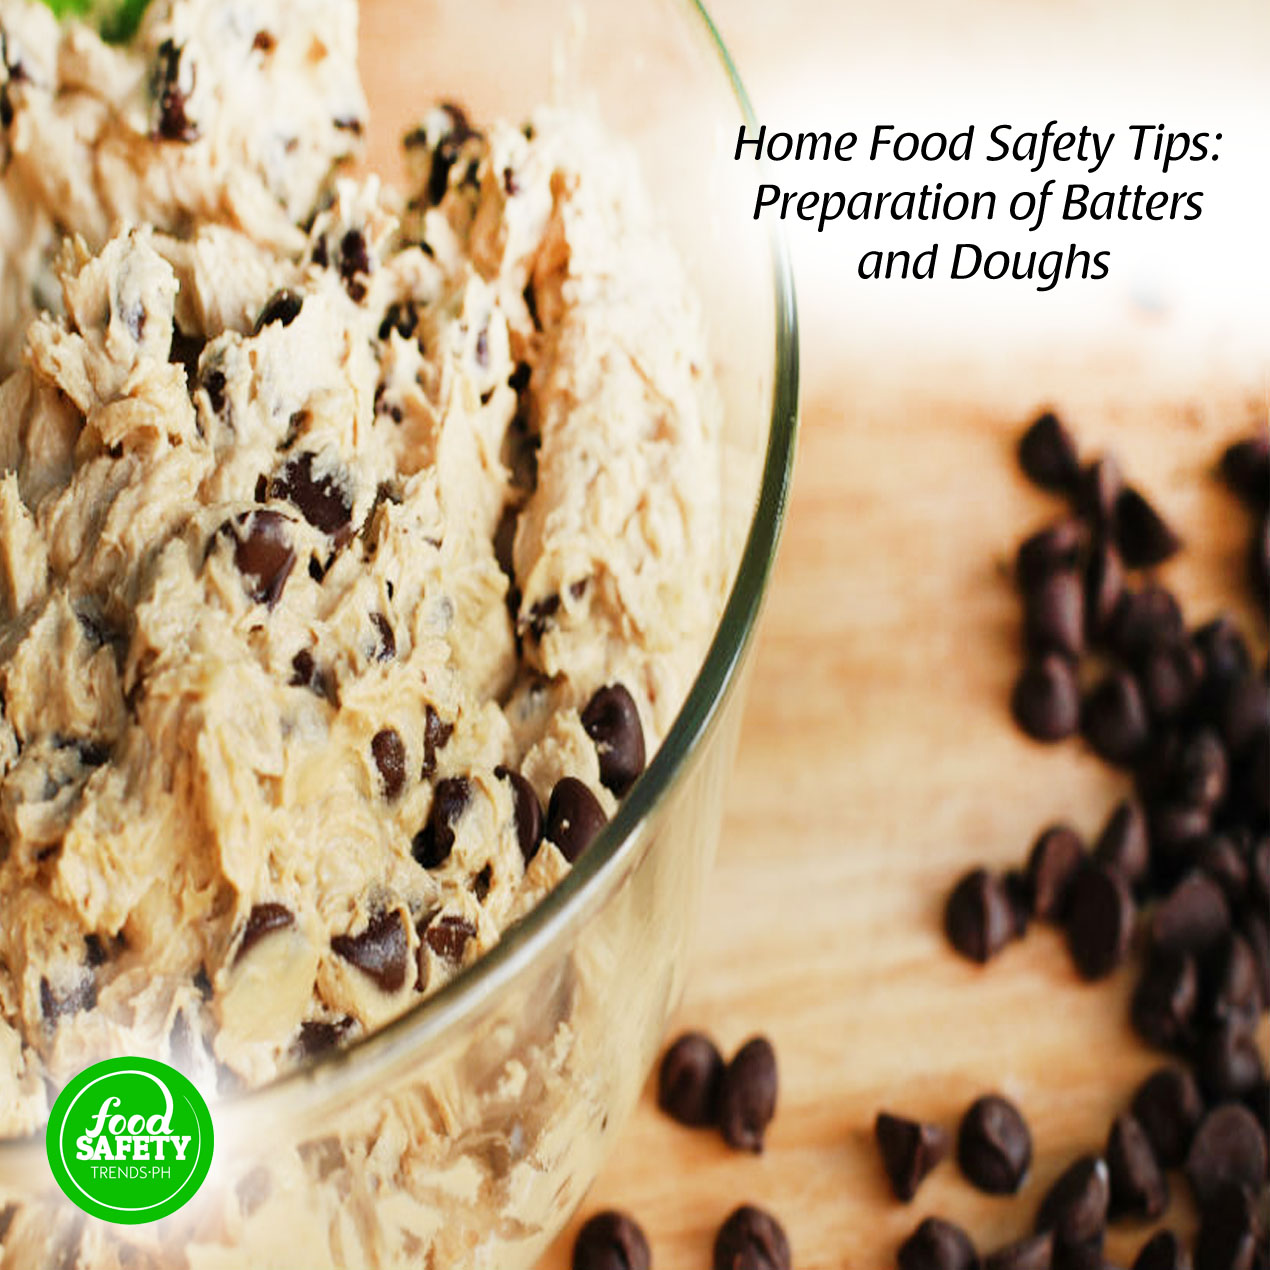 Home Food Safety Tips: Preparation of Batters and Doughs